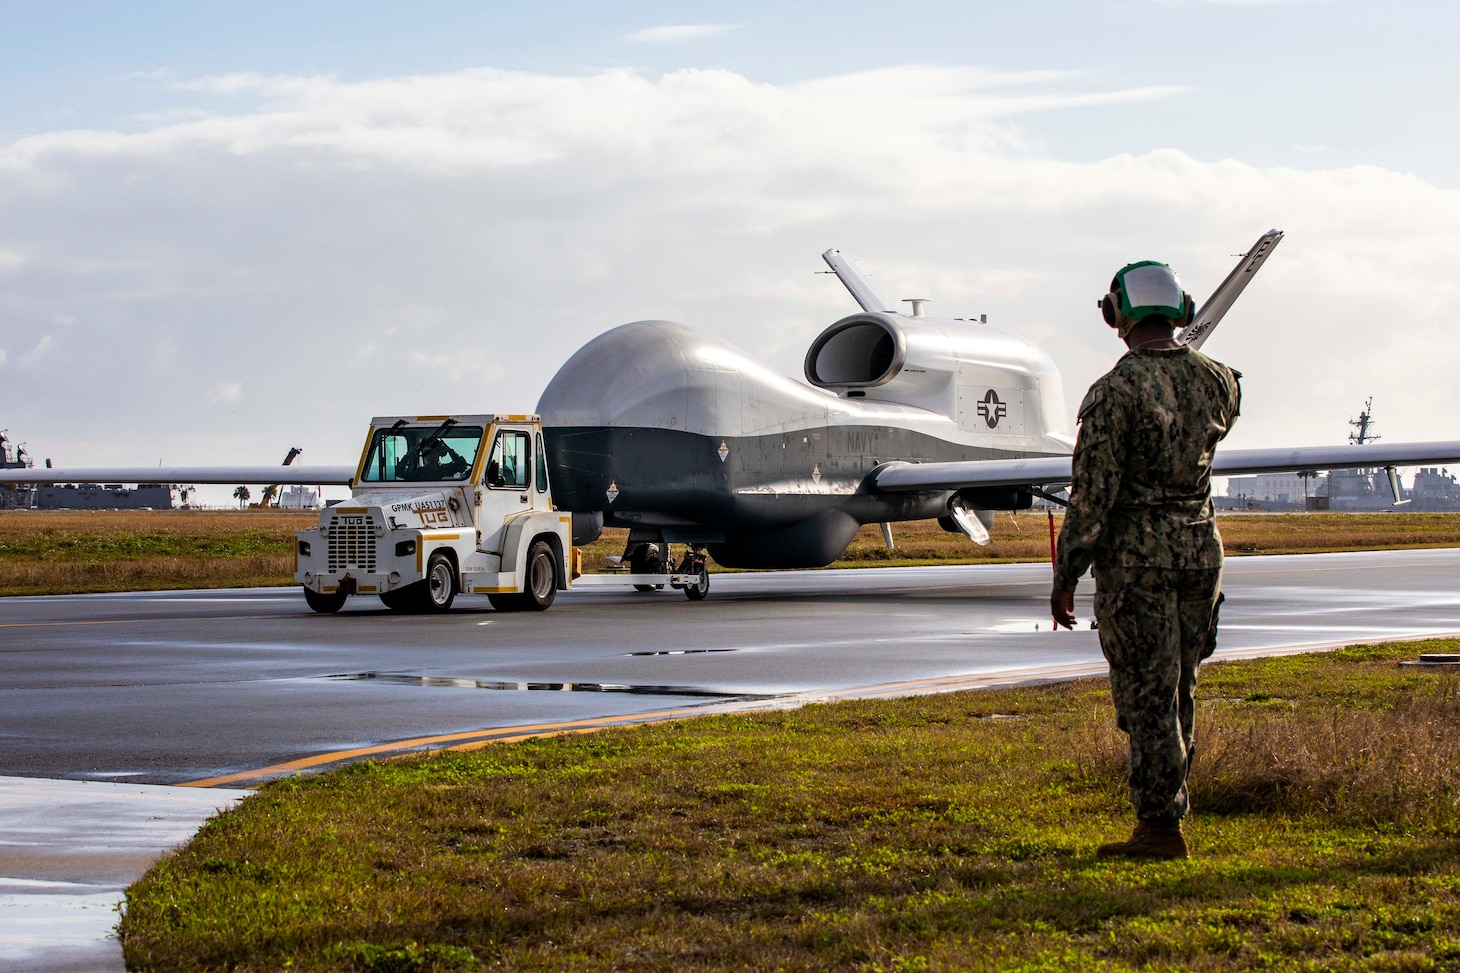 An MQ-4C Triton Unmanned Aircraft System (UAS), assigned to Unmanned Patrol Squadron 19 (VUP-19), taxis across the flight line